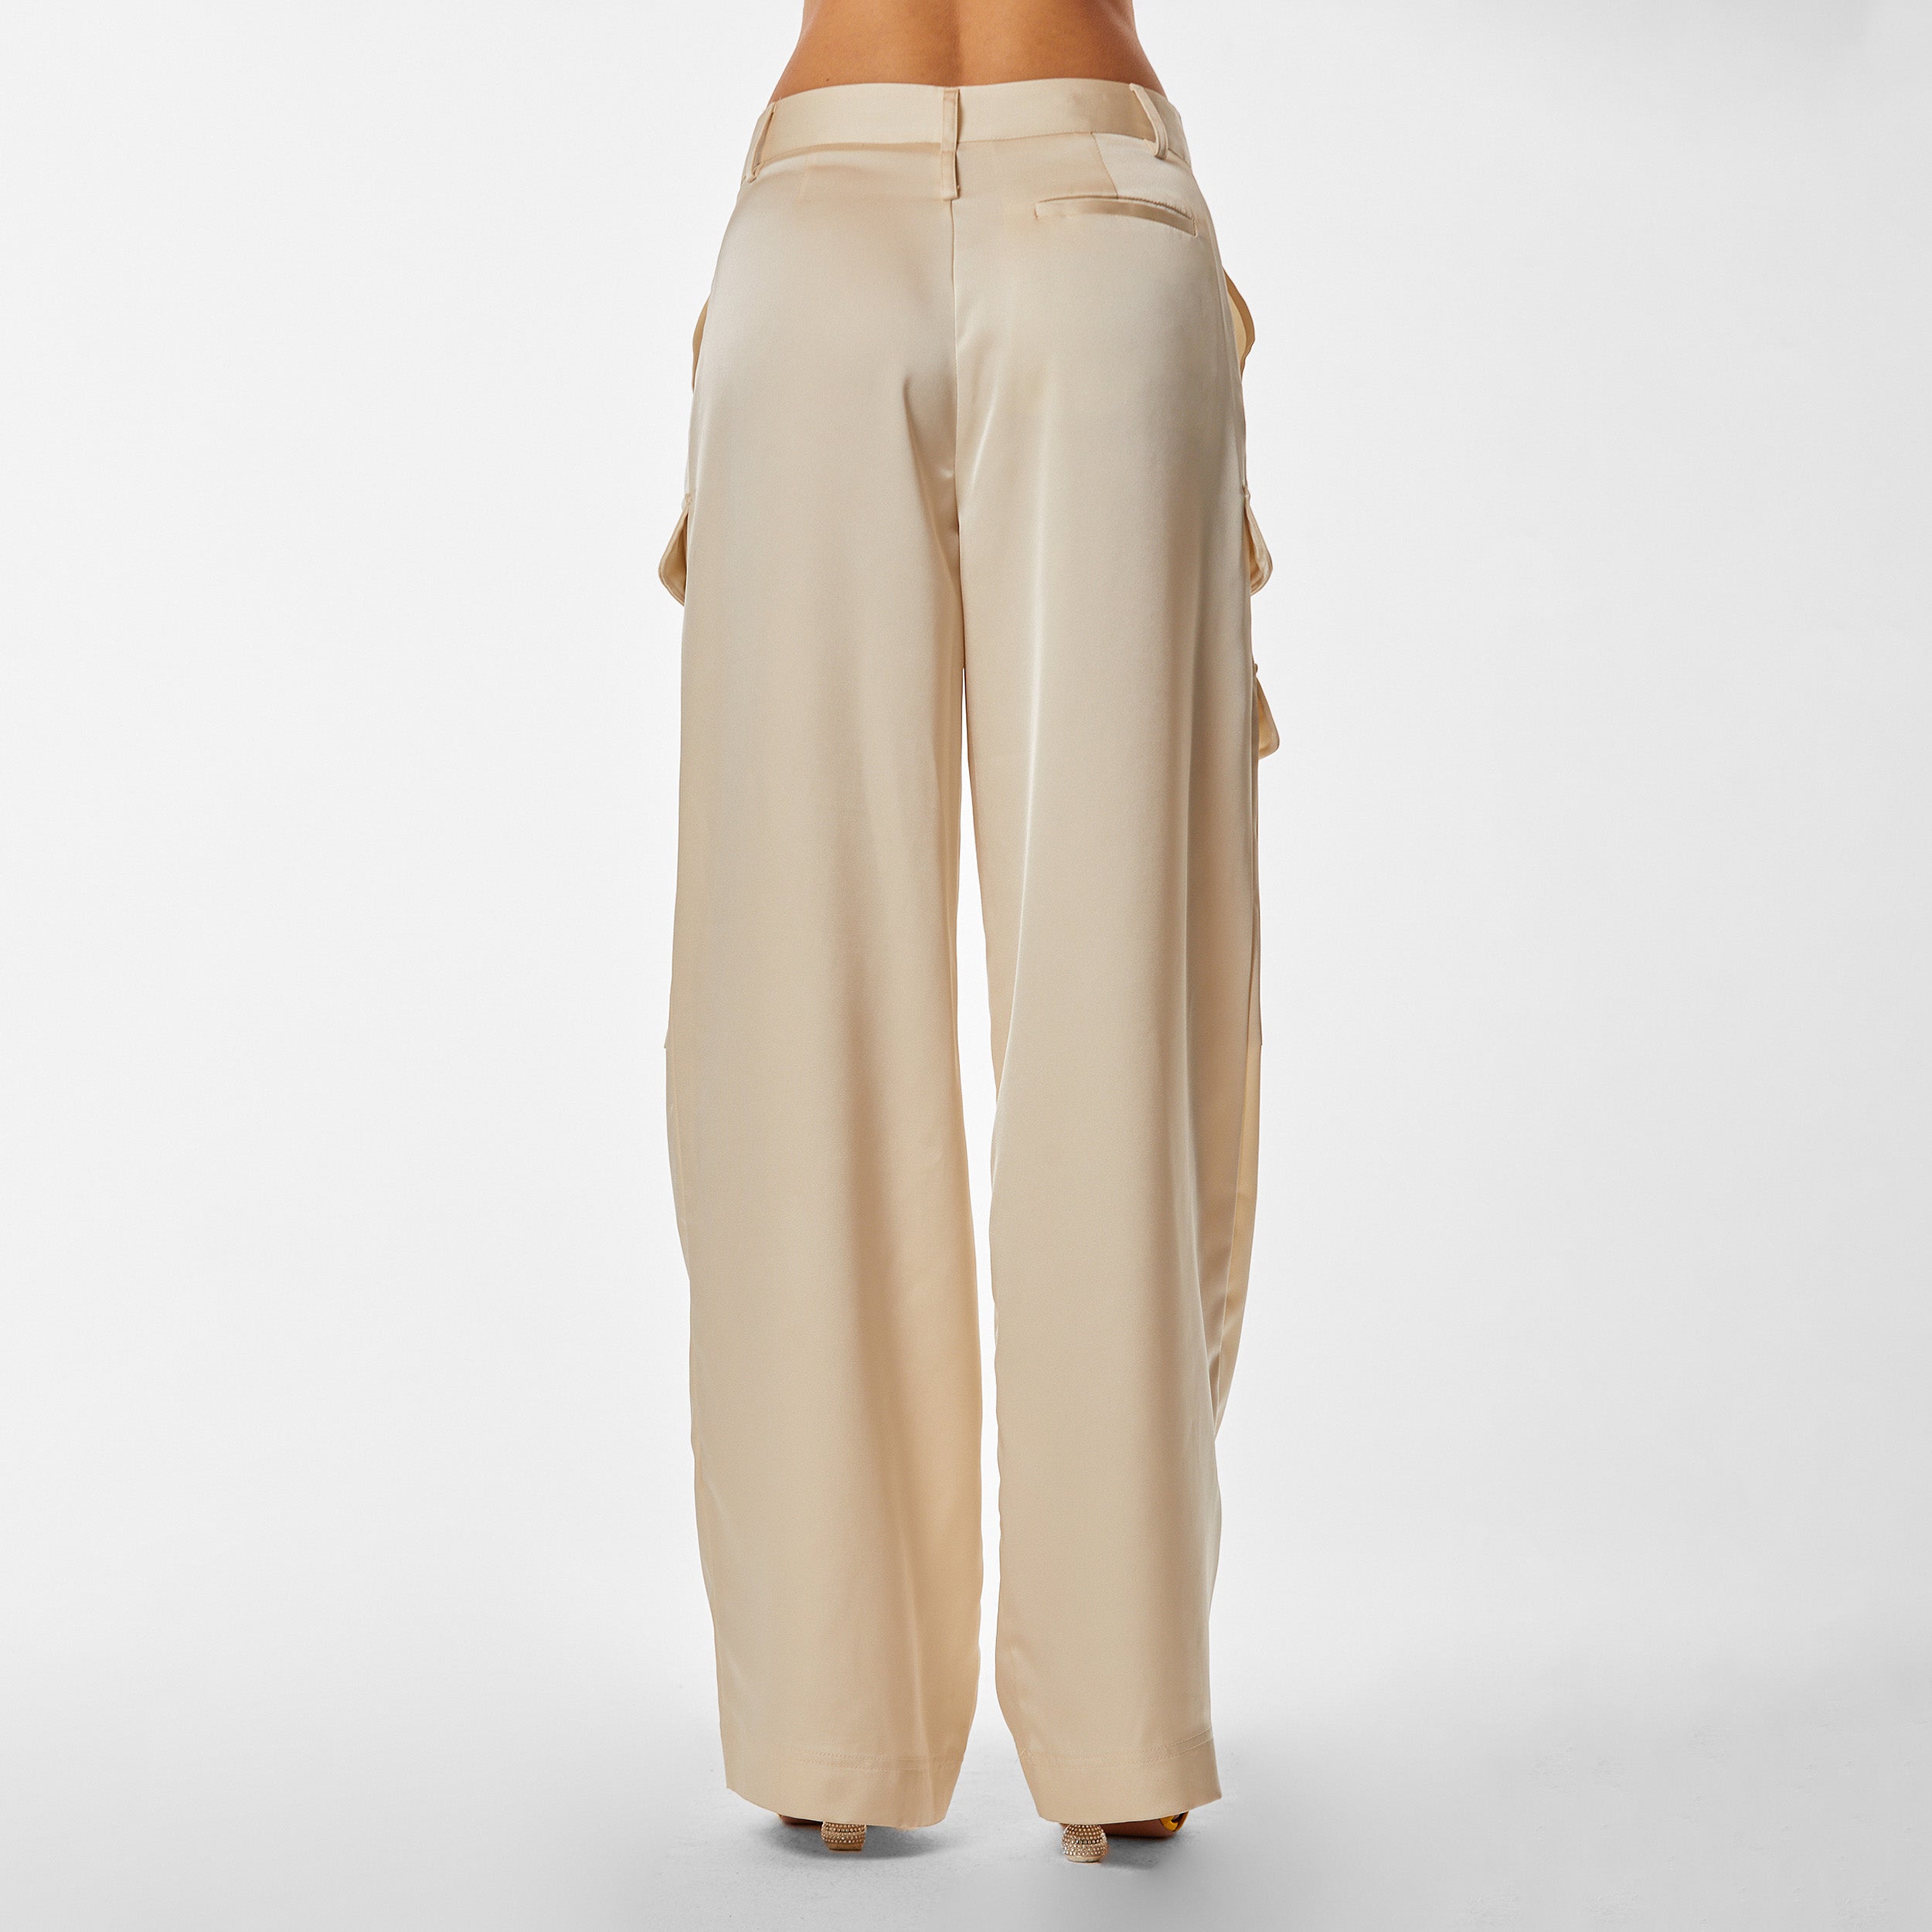 Rear view of woman wearing Pearl Satin Milan Pant features Mid-rise with side pockets and cargo detail. Luxurious and structured satin-like fabric. 